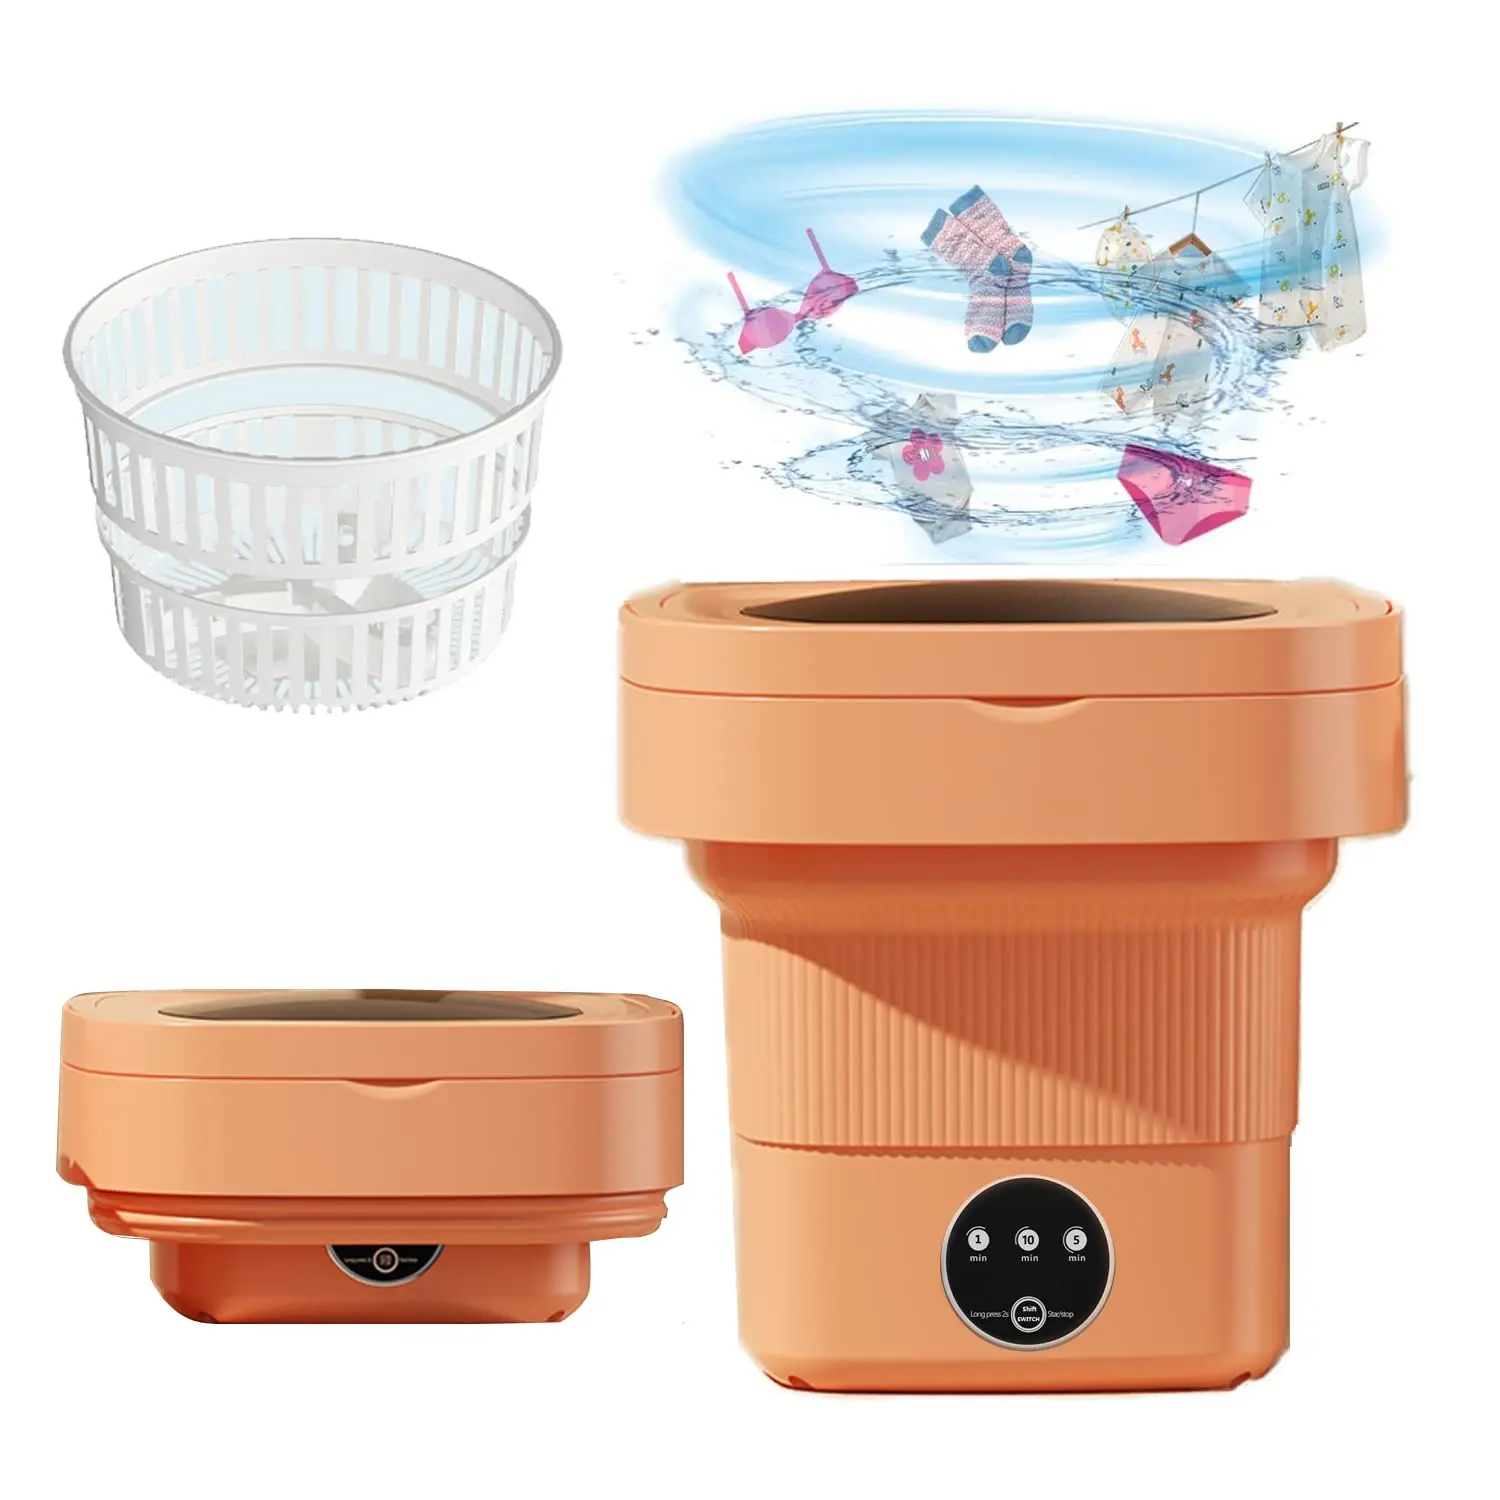 

Portable Mini Washing Machine Household 6.5L Foldable Socks Underwear Panties Washing Machine with Spin Dryer with Centrifuge